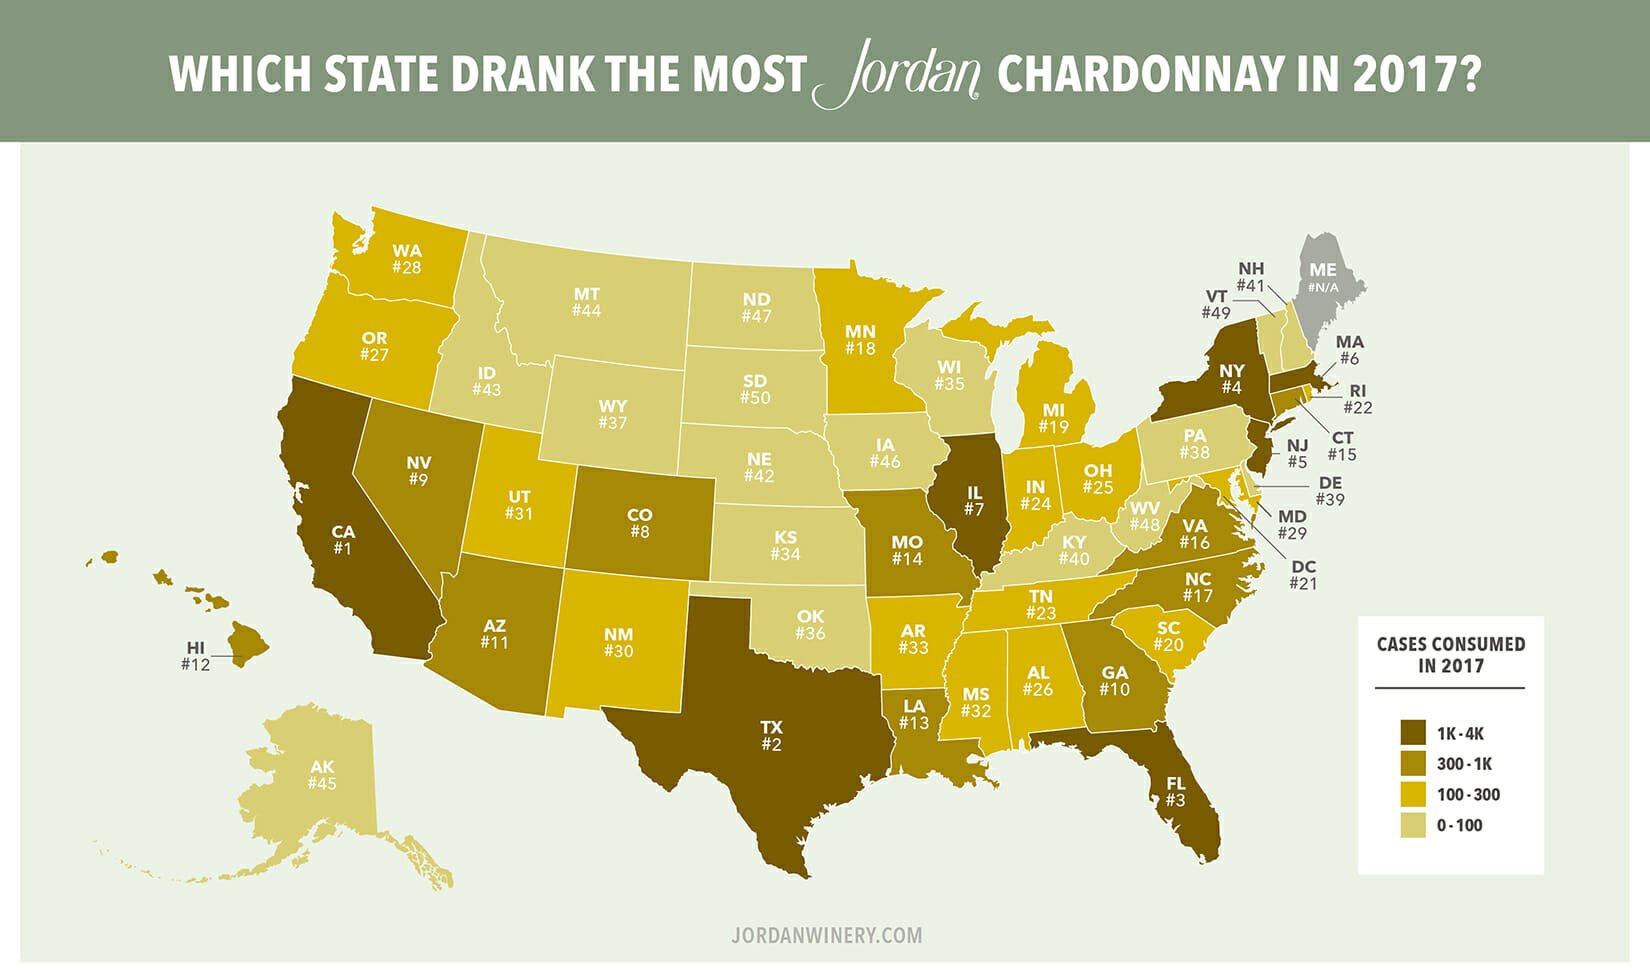 Jordan Chardonnay Case Consumption by State Map